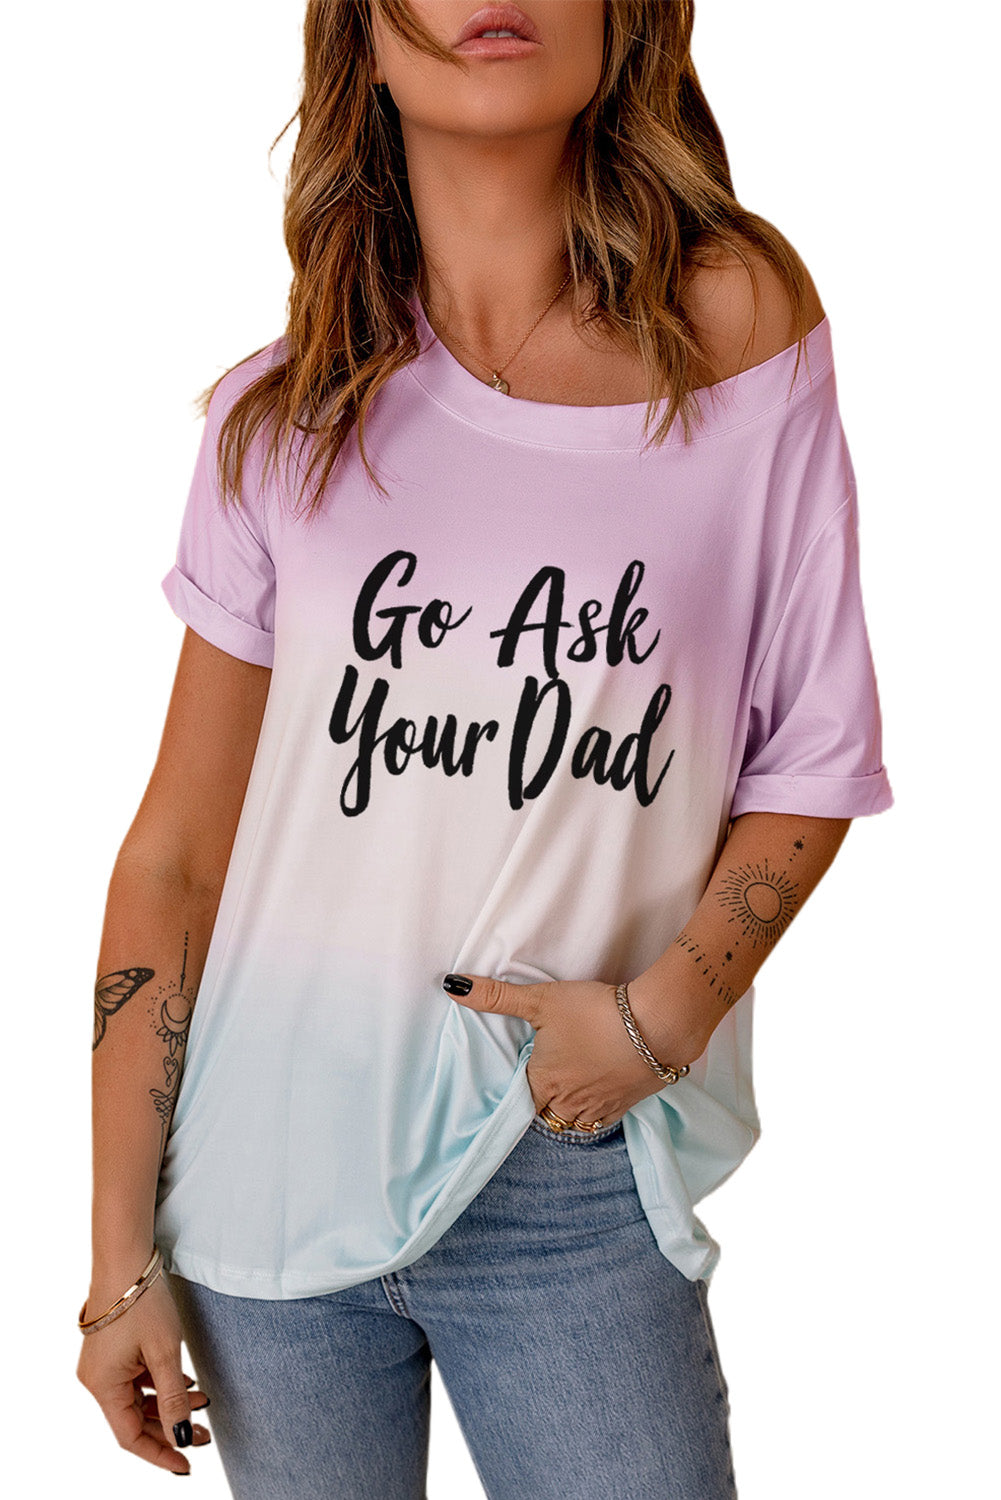 GO ASK YOUR DAD Graphic Tee - T-Shirts - Shirts & Tops - 4 - 2024